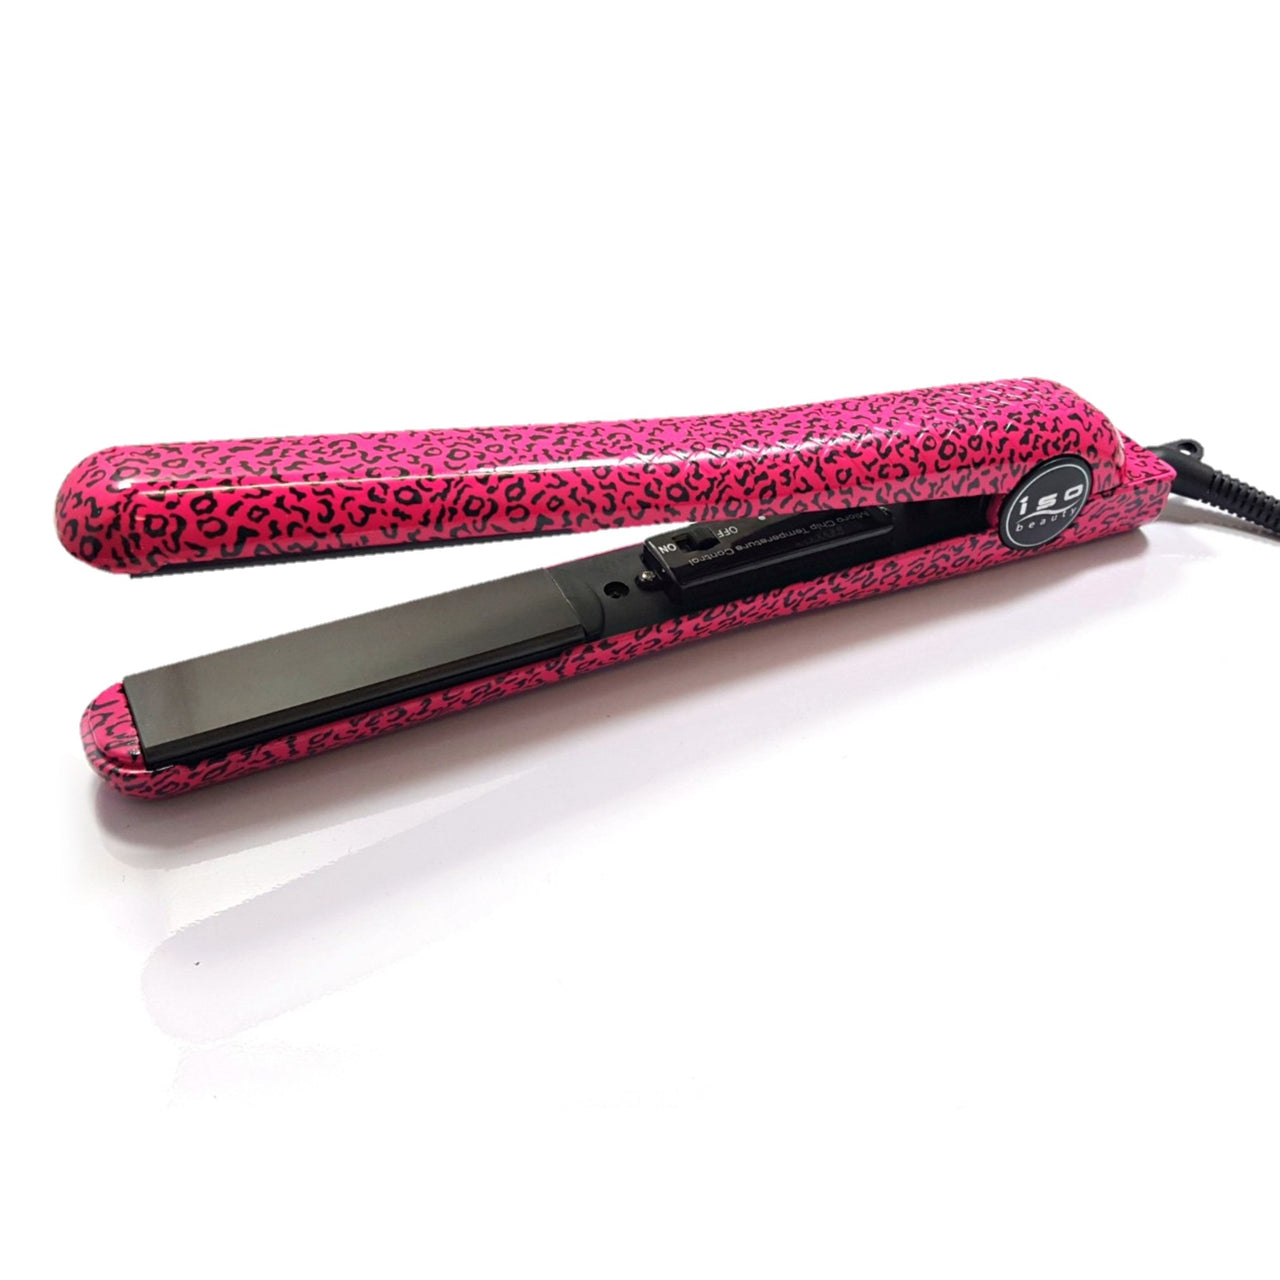 Limited Edition Pink Leopard 1.25" Ceramic Flat Iron Hair Straightener with Adjustable Temperature